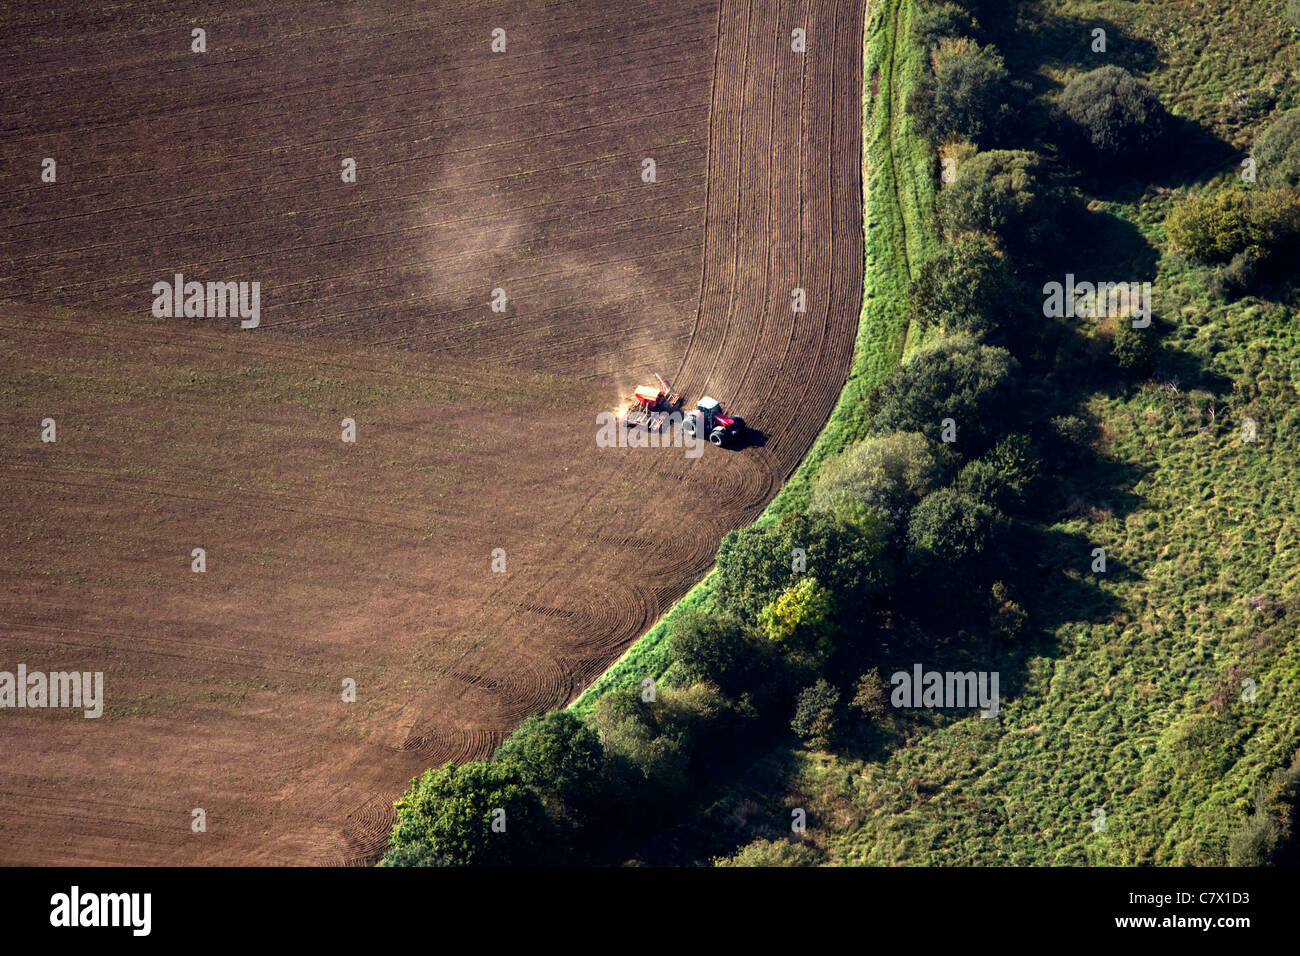 Aerial view of a single tractor in a dry field with dust billowing, tilling the dry soil, Stock Photo